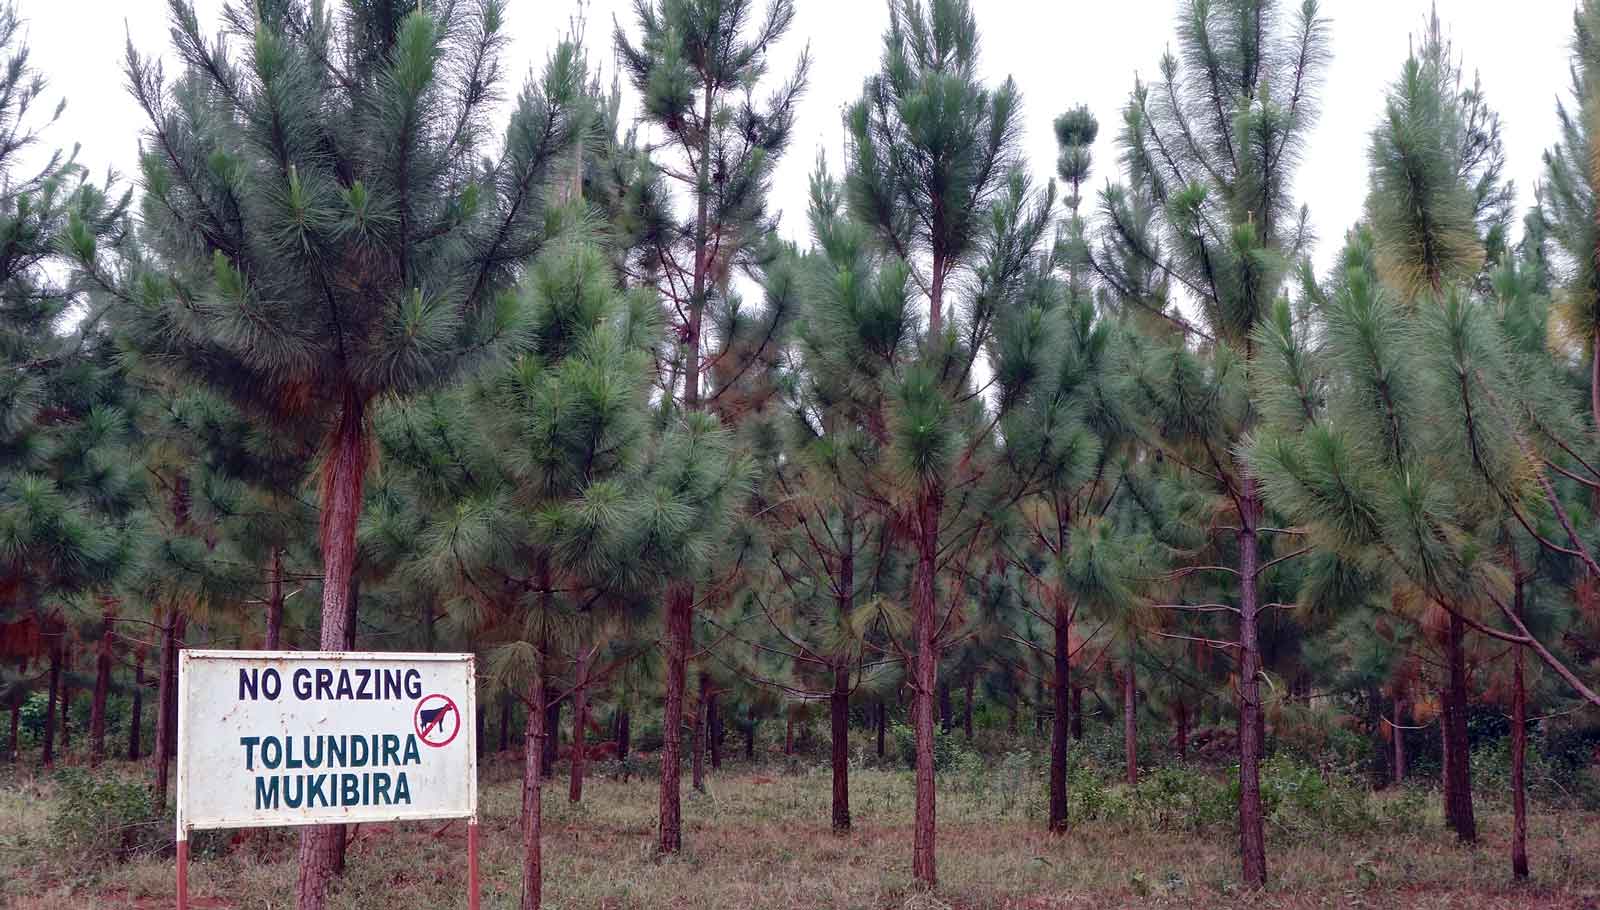 A cluster of young-ish evergreen trees. In the foreground, a large sign reads 'No grazing. Tolundira mukibira.'